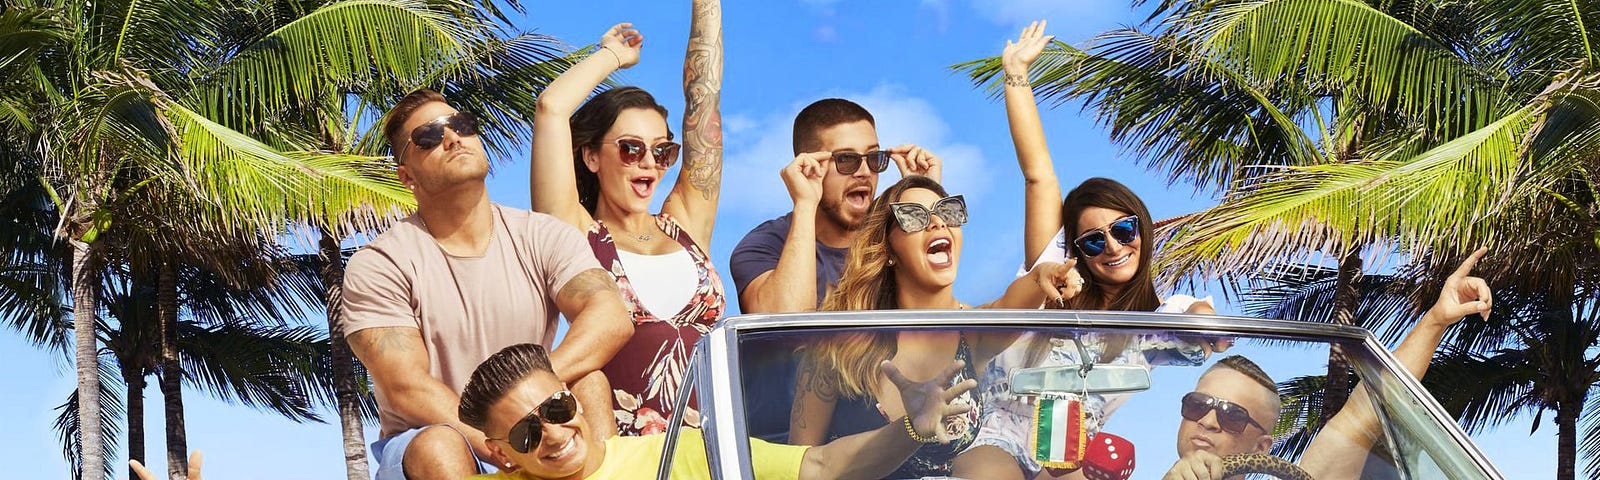 jersey shore family vacation season 3 episode 1 free online